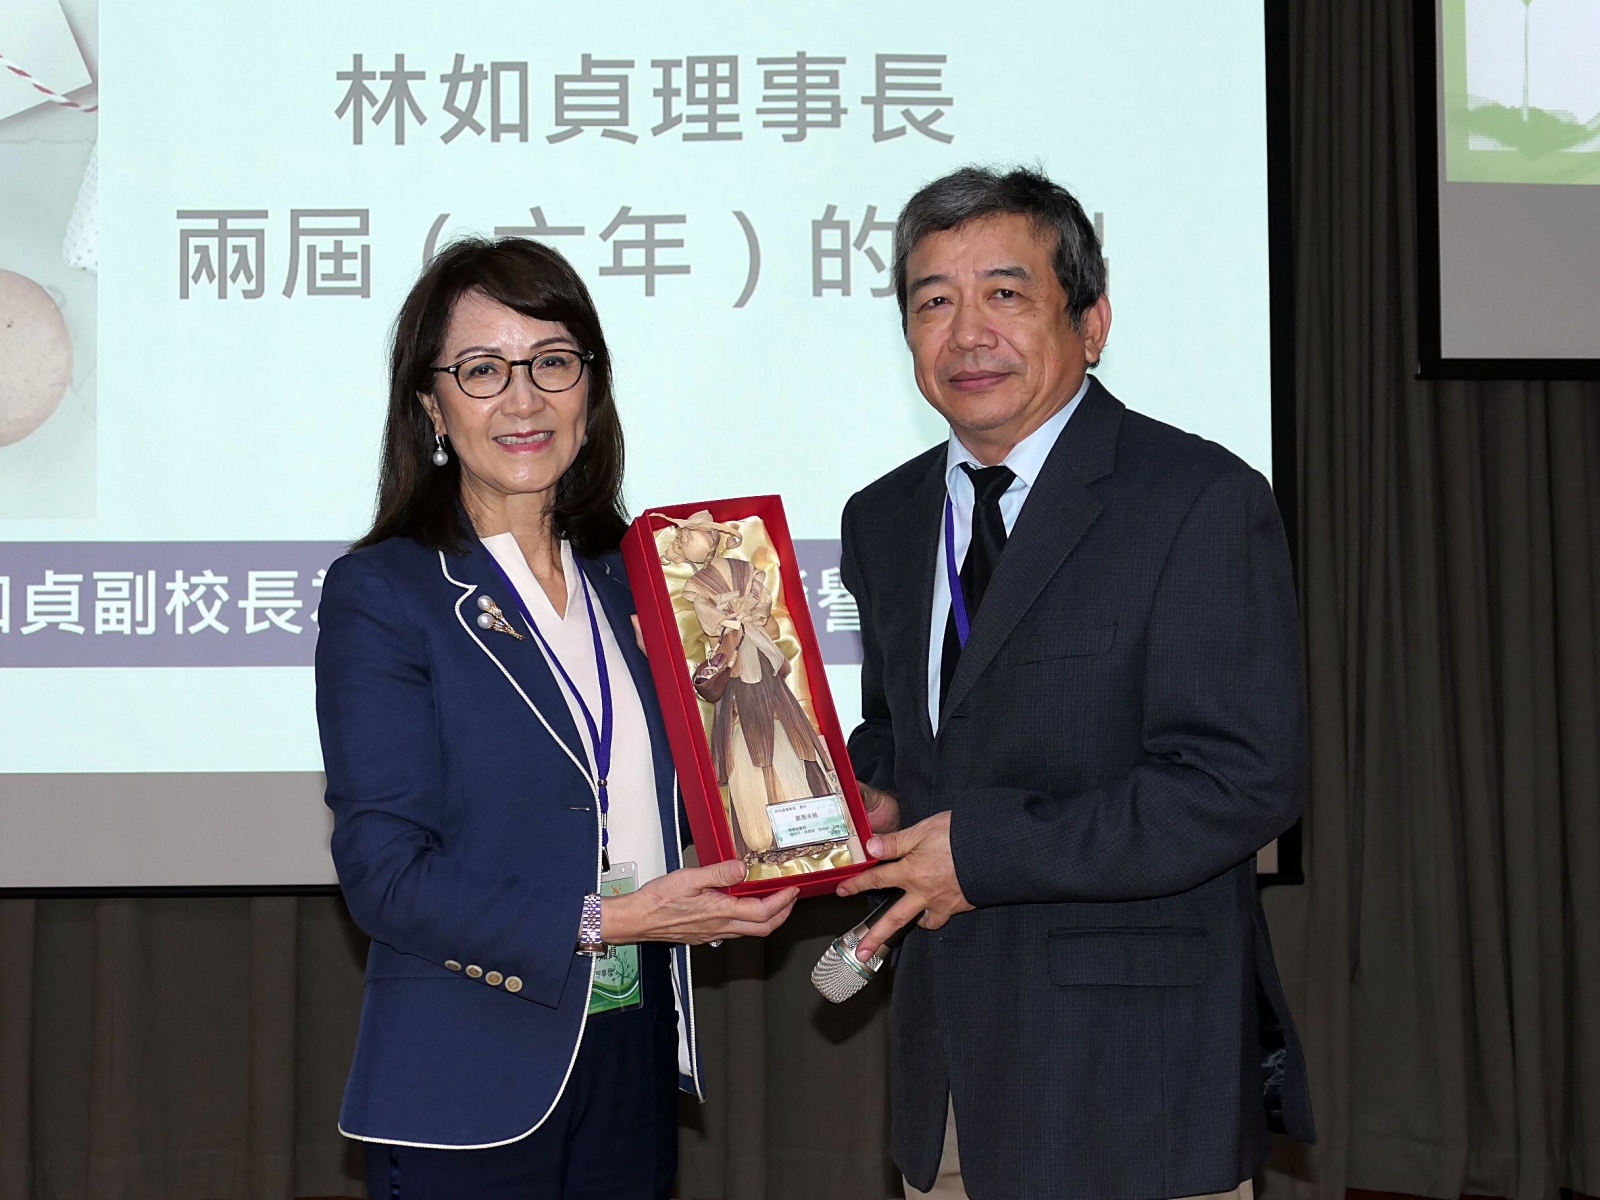 The Chinese Association of Business and Management Technology showed their gratitude by presenting a gift to Vice President Ru-Jen Lin for her dedicated service as the Chairman of the Board for two terms (a total of six years).